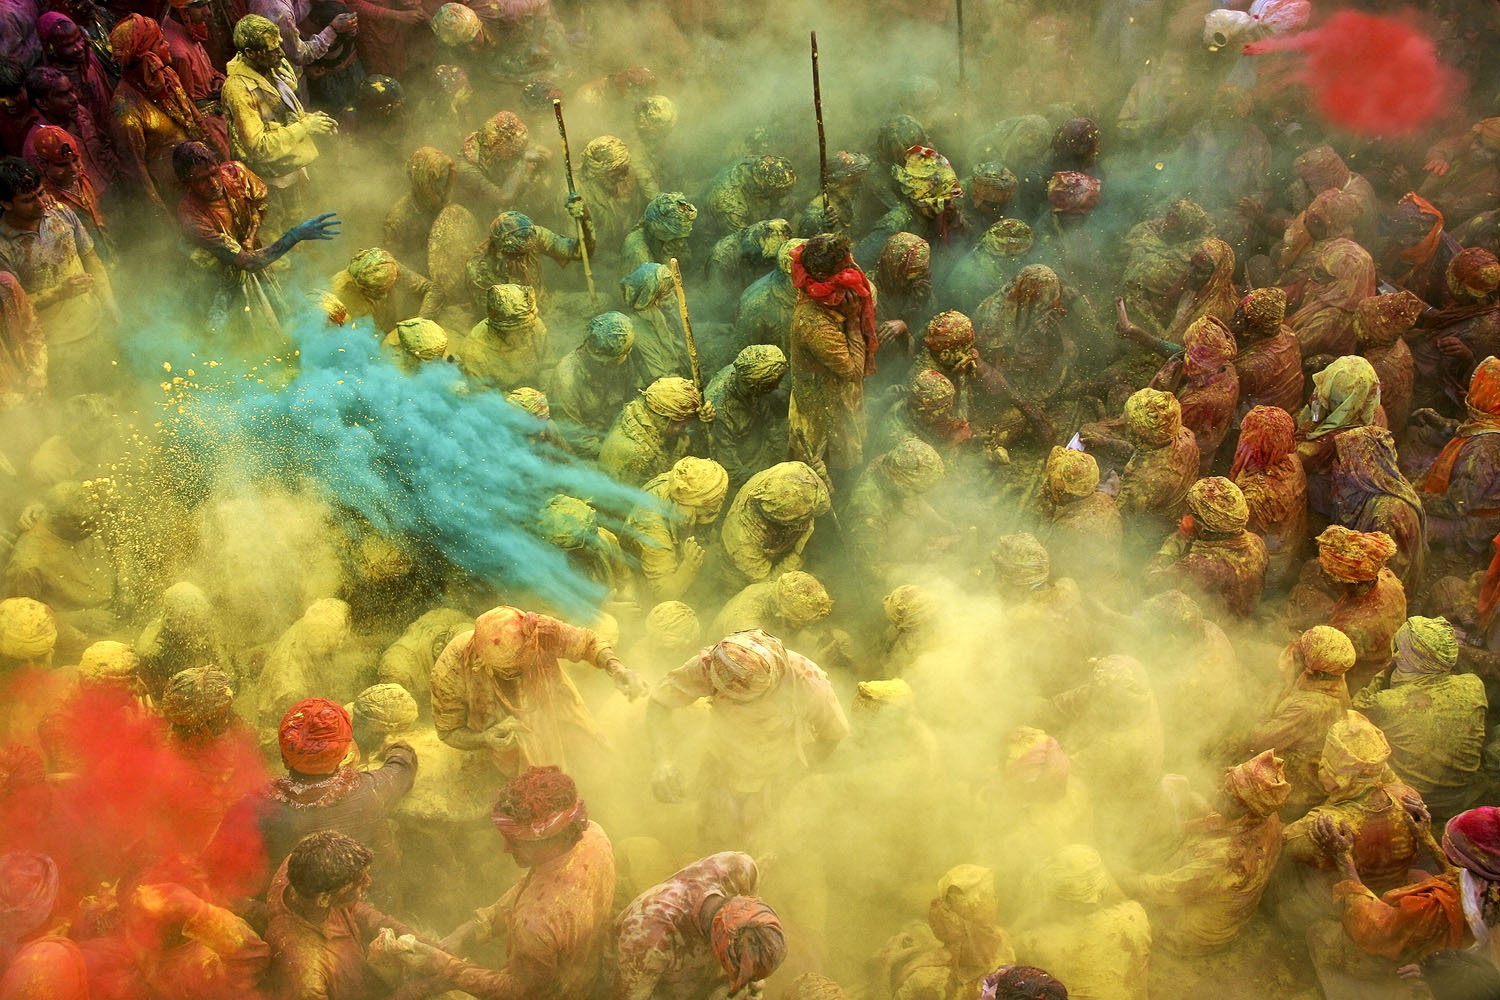 Anurag Kumar: "Holi — the festival of colors — is undoubtedly the most fun-filled and boisterous of Hindu festivals. It's an occasion that brings in unadulterated joy and mirth, fun and play, music and dance, and, of course, lots of bright colors!"